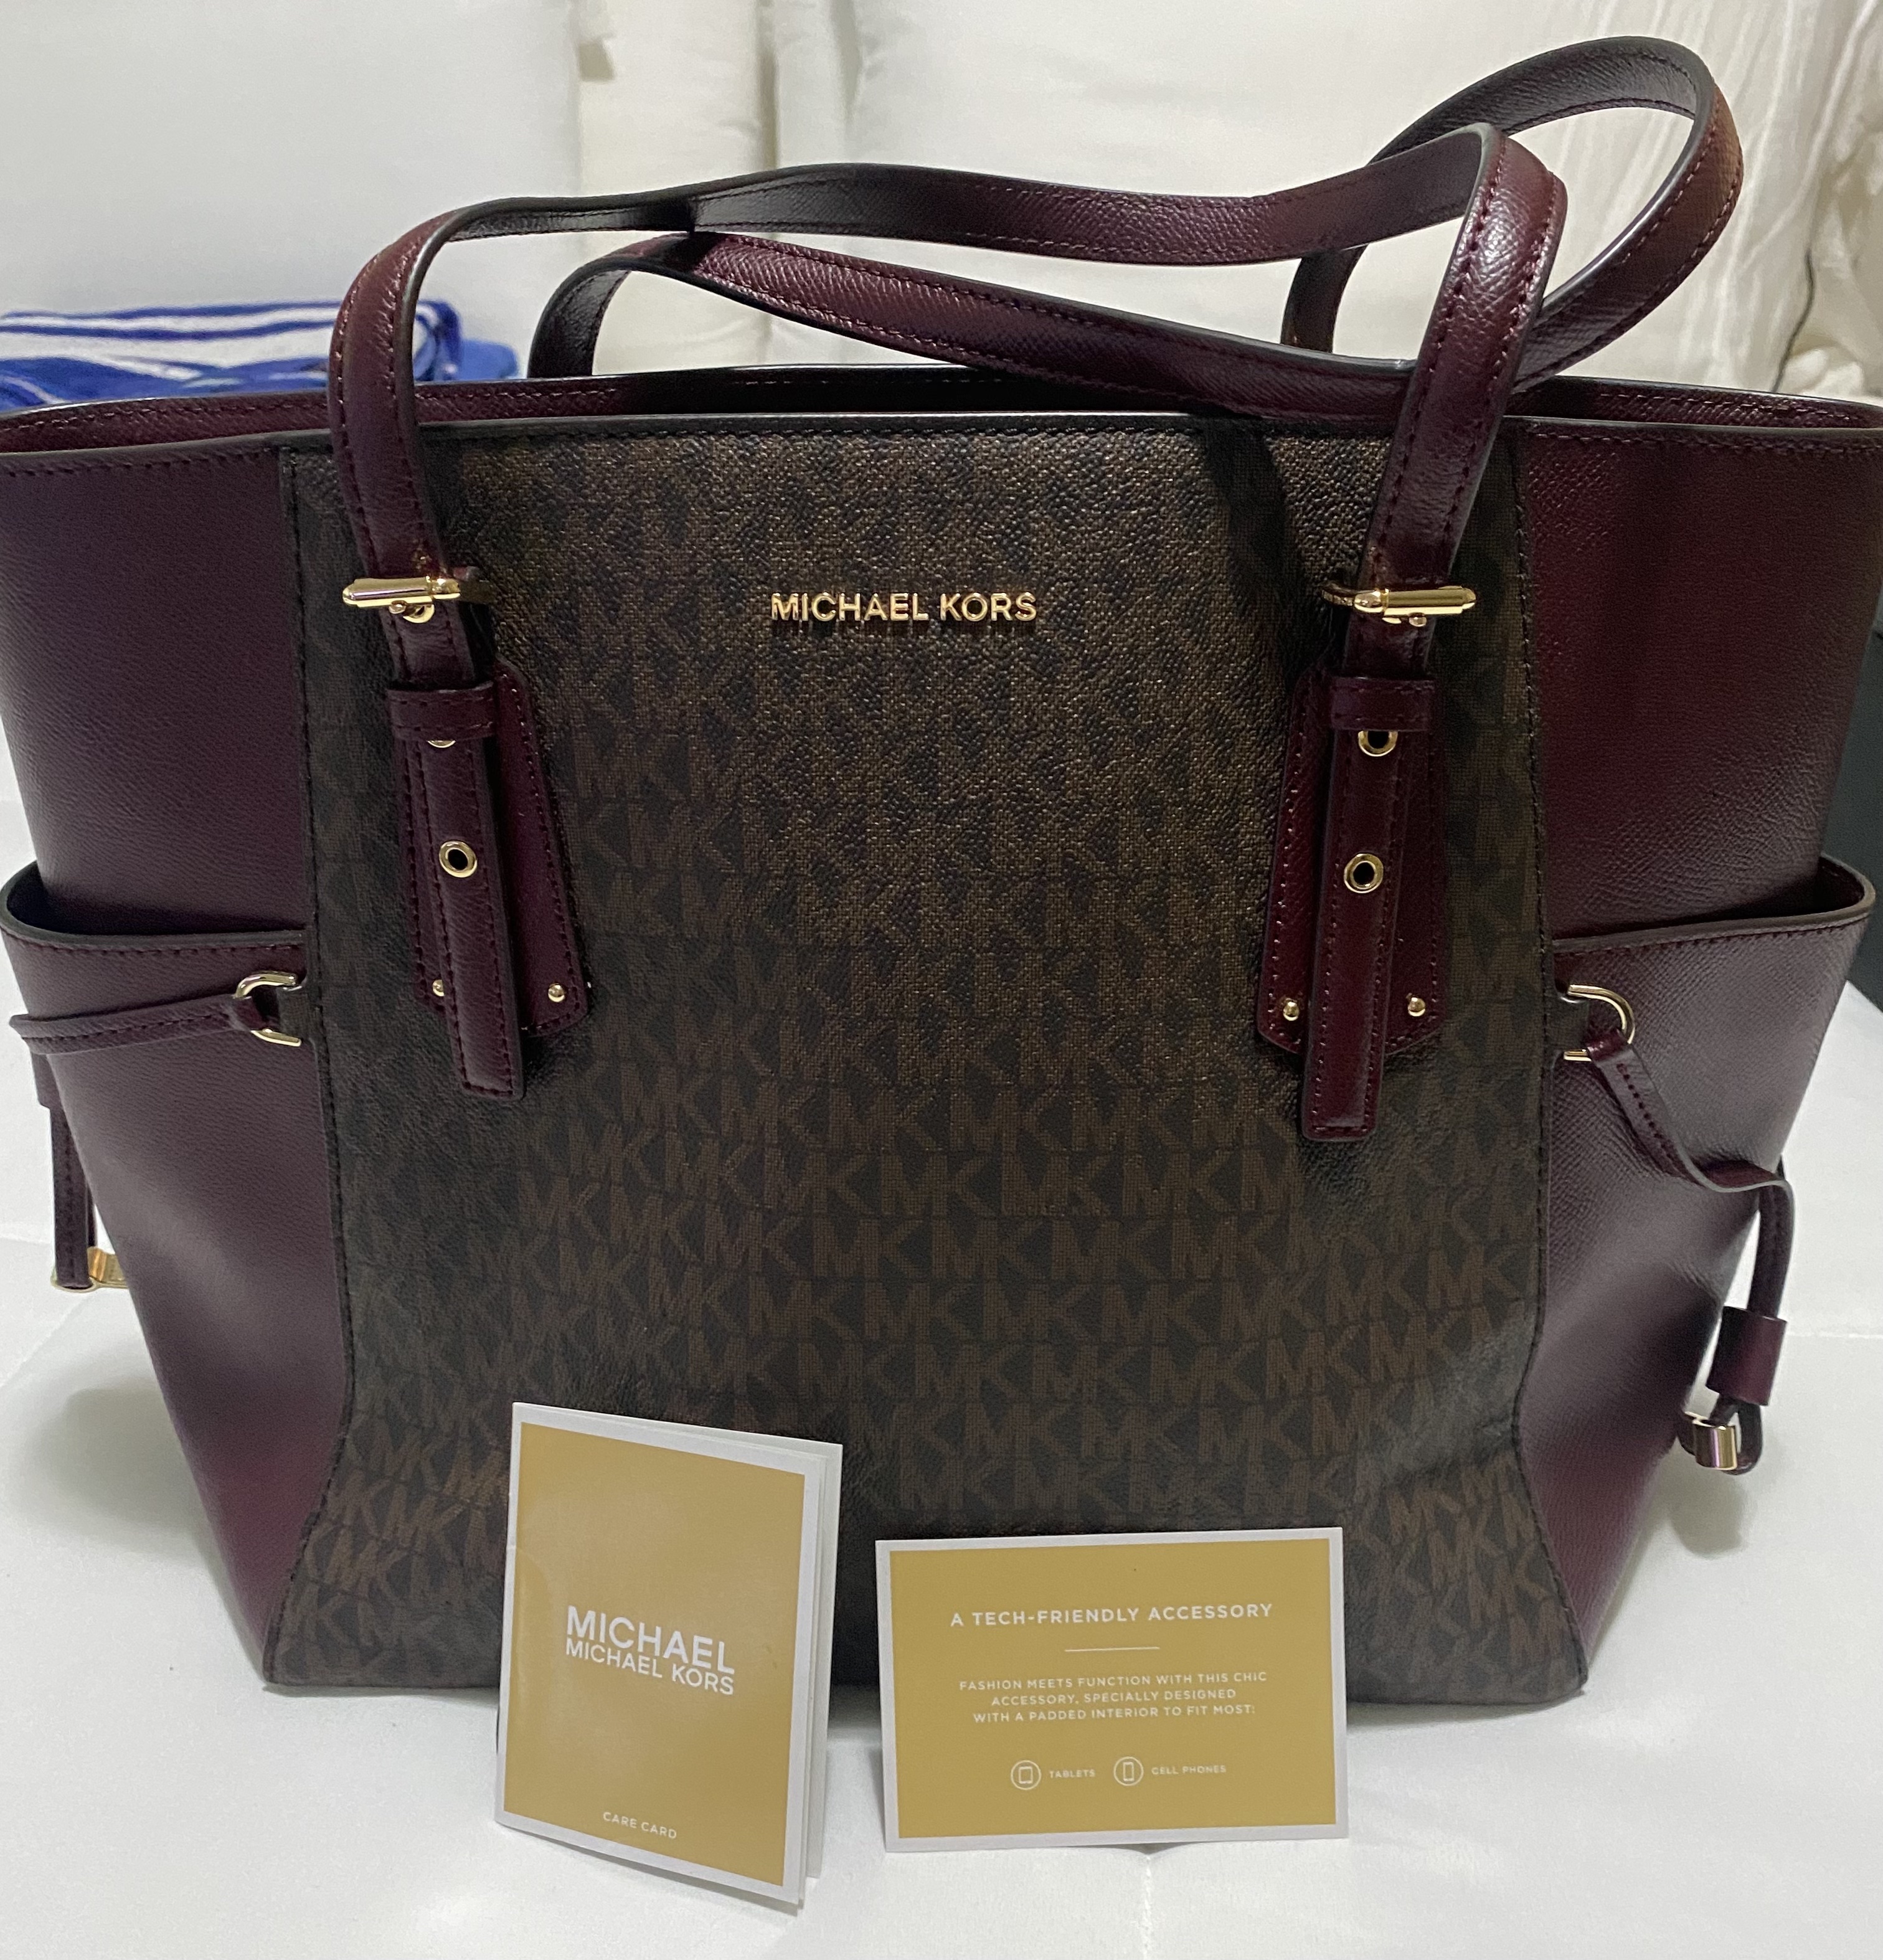 WOMEN'S ORIGINAL Michael Kors Voyager East West Signature Tote BRAND NEW  (USA Macy's Purchased with Orig. Price Tag still attached shown on photo)